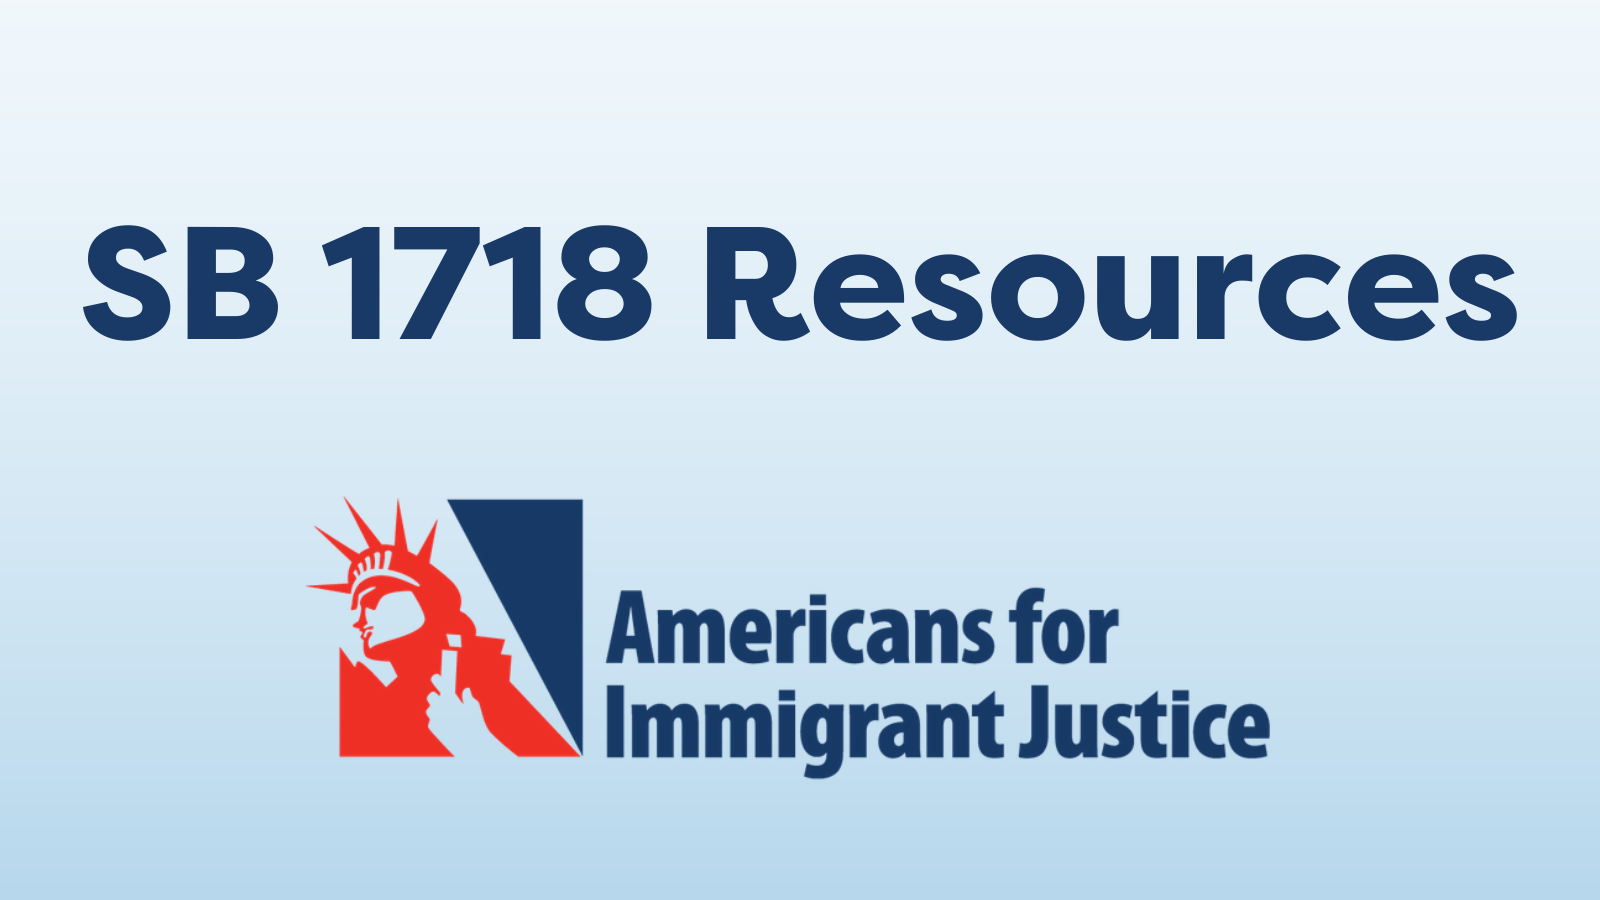 SB 1718 Resources Americans for Immigrant Justice